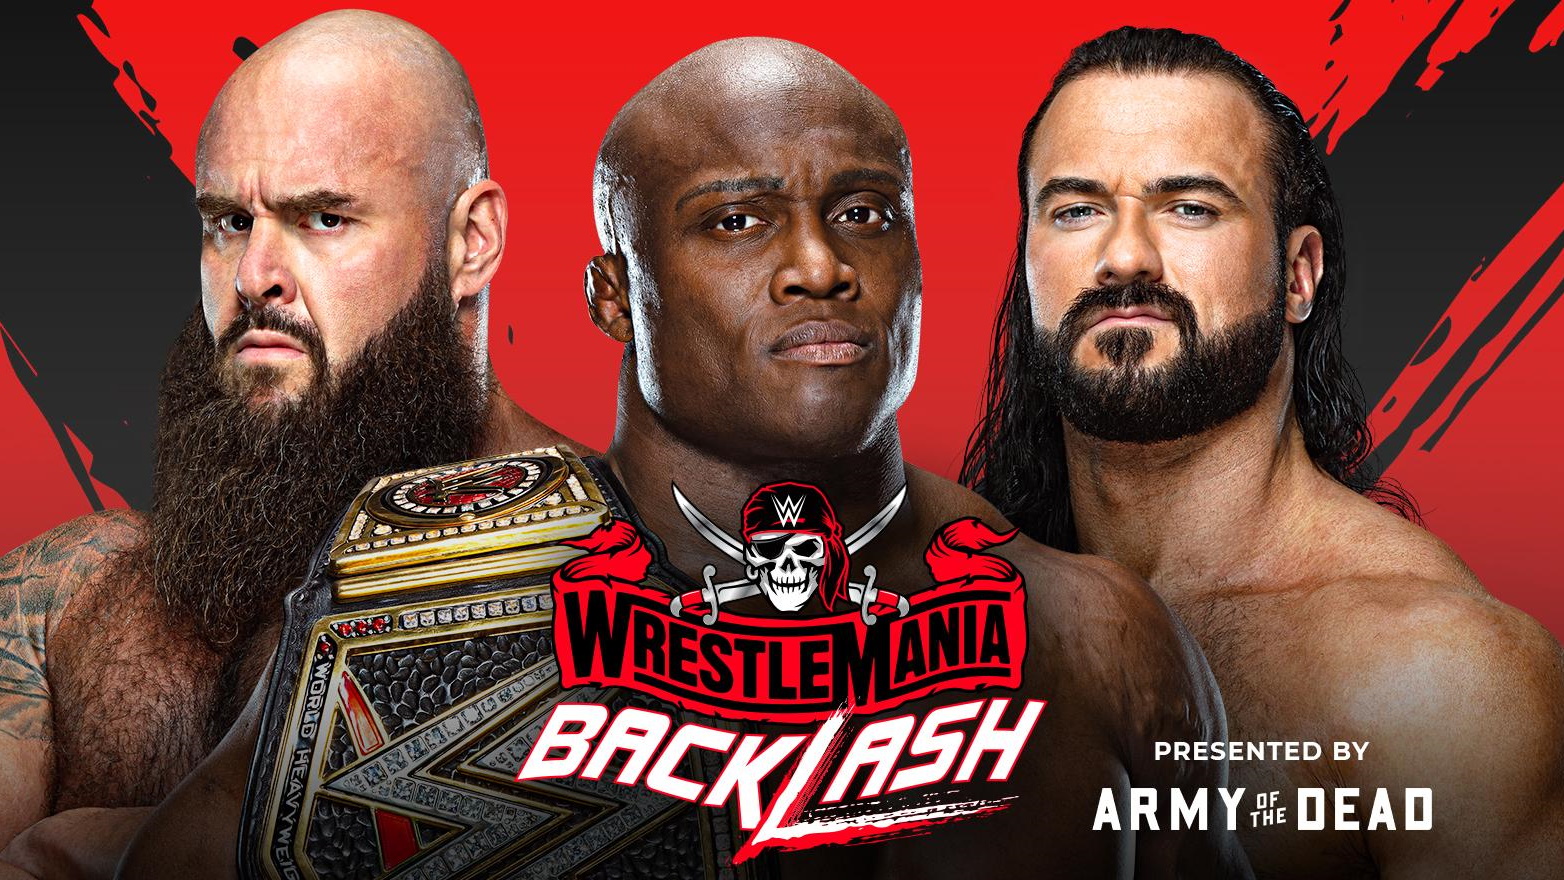 WrestleMania Backlash 2021 live stream how to watch WWE online from anywhere TechRadar